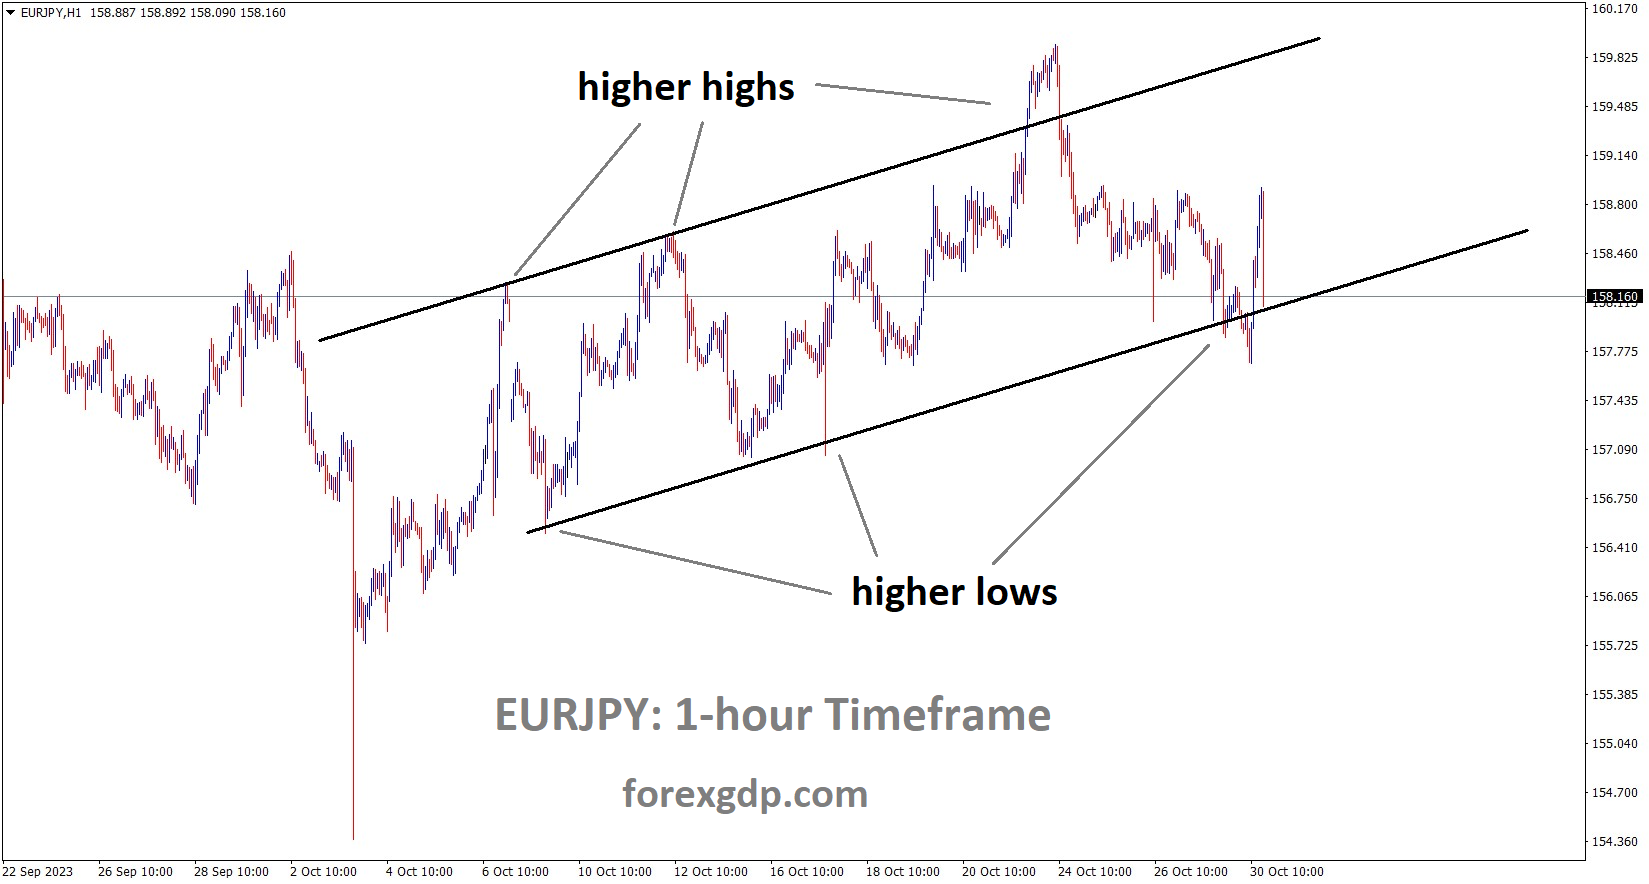 EURJPY is moving in an Ascending channel and the market has reached the higher low area of the channel